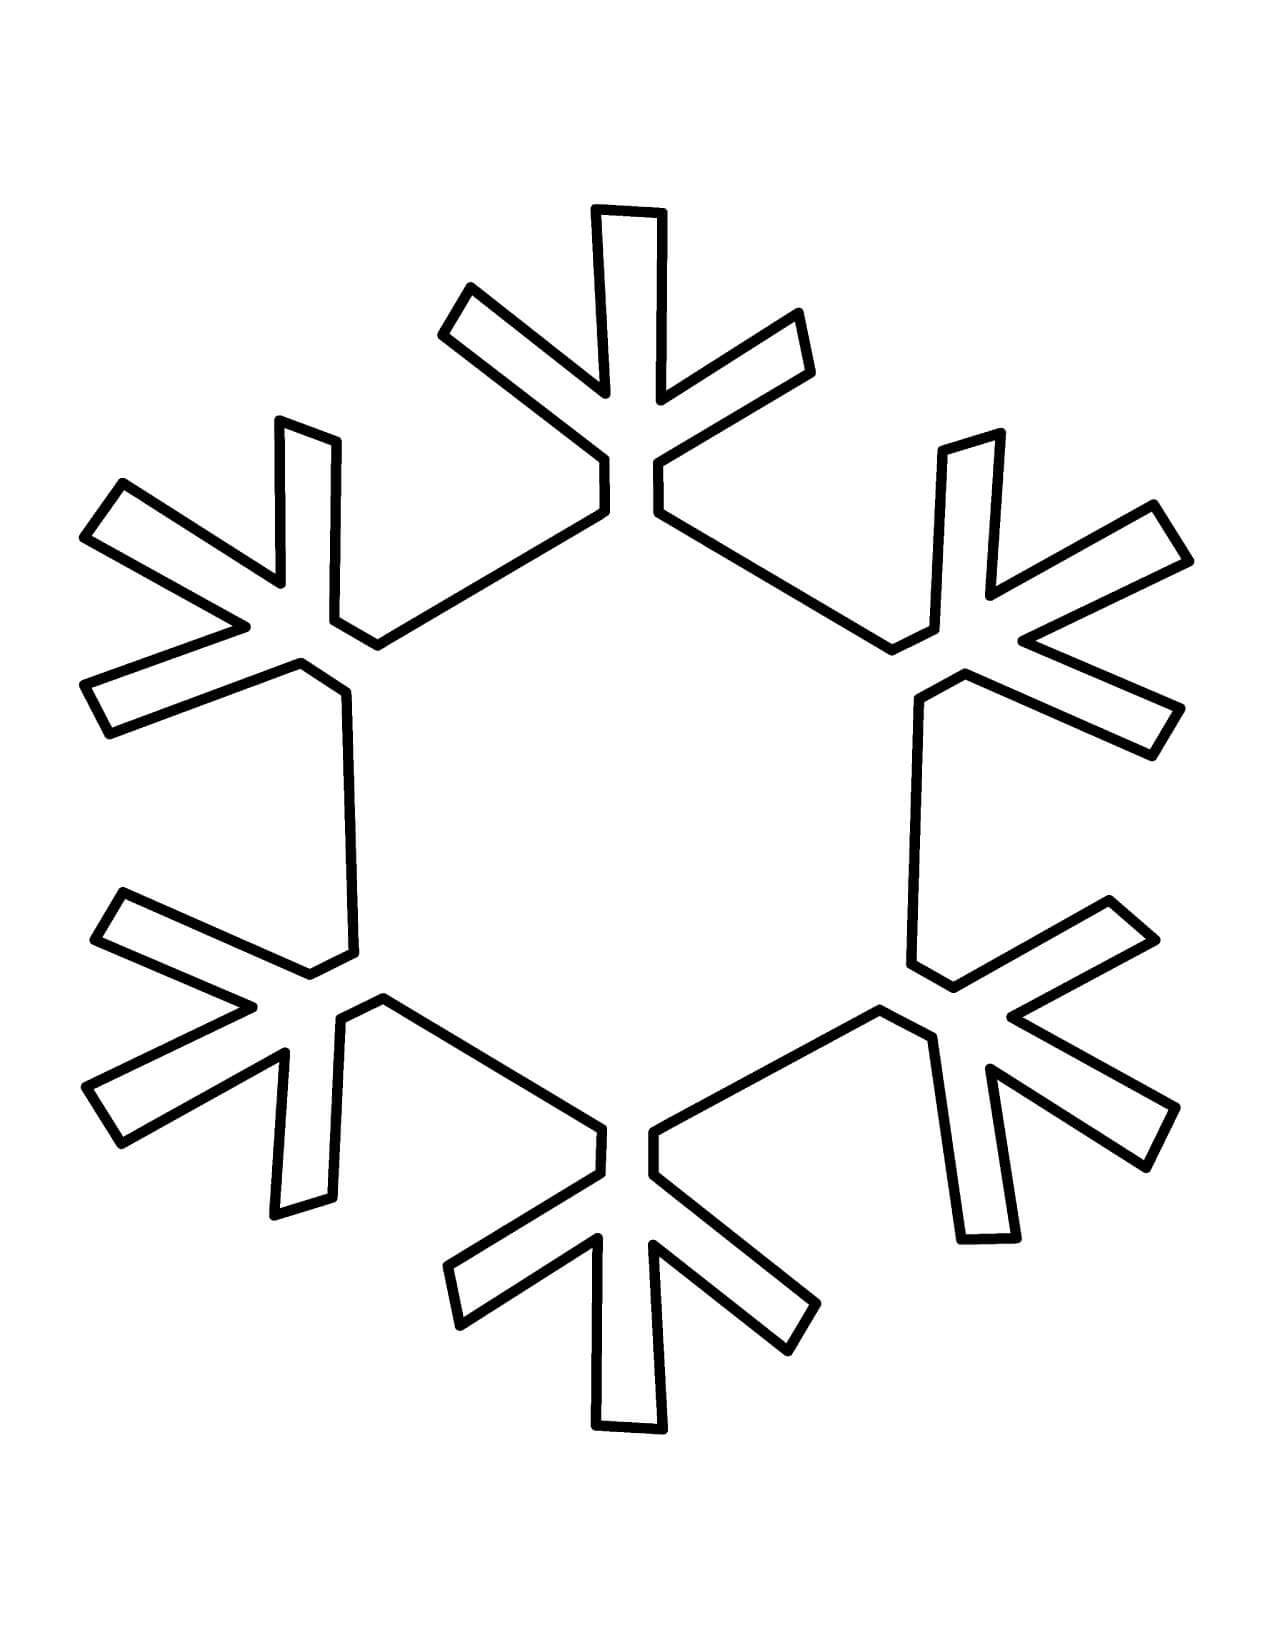 Free Snowflake Line Art, Download Free Clip Art, Free Clip With Regard To Blank Snowflake Template